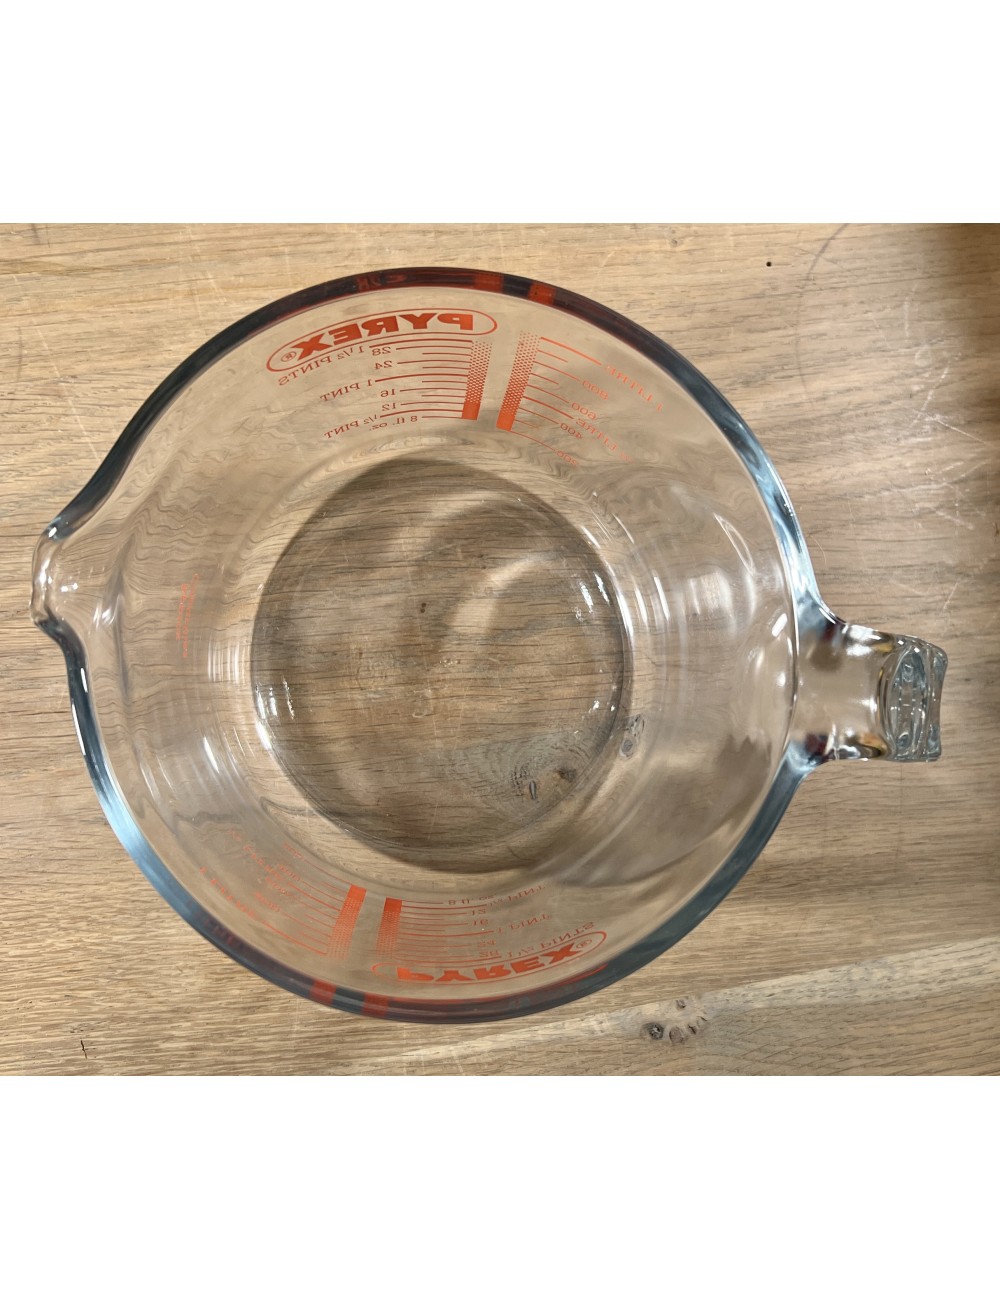 https://www.ramblingrose.nl/14516-large_default/measuring-cup-pyrex-thick-glass-model-with-size-markings.jpg